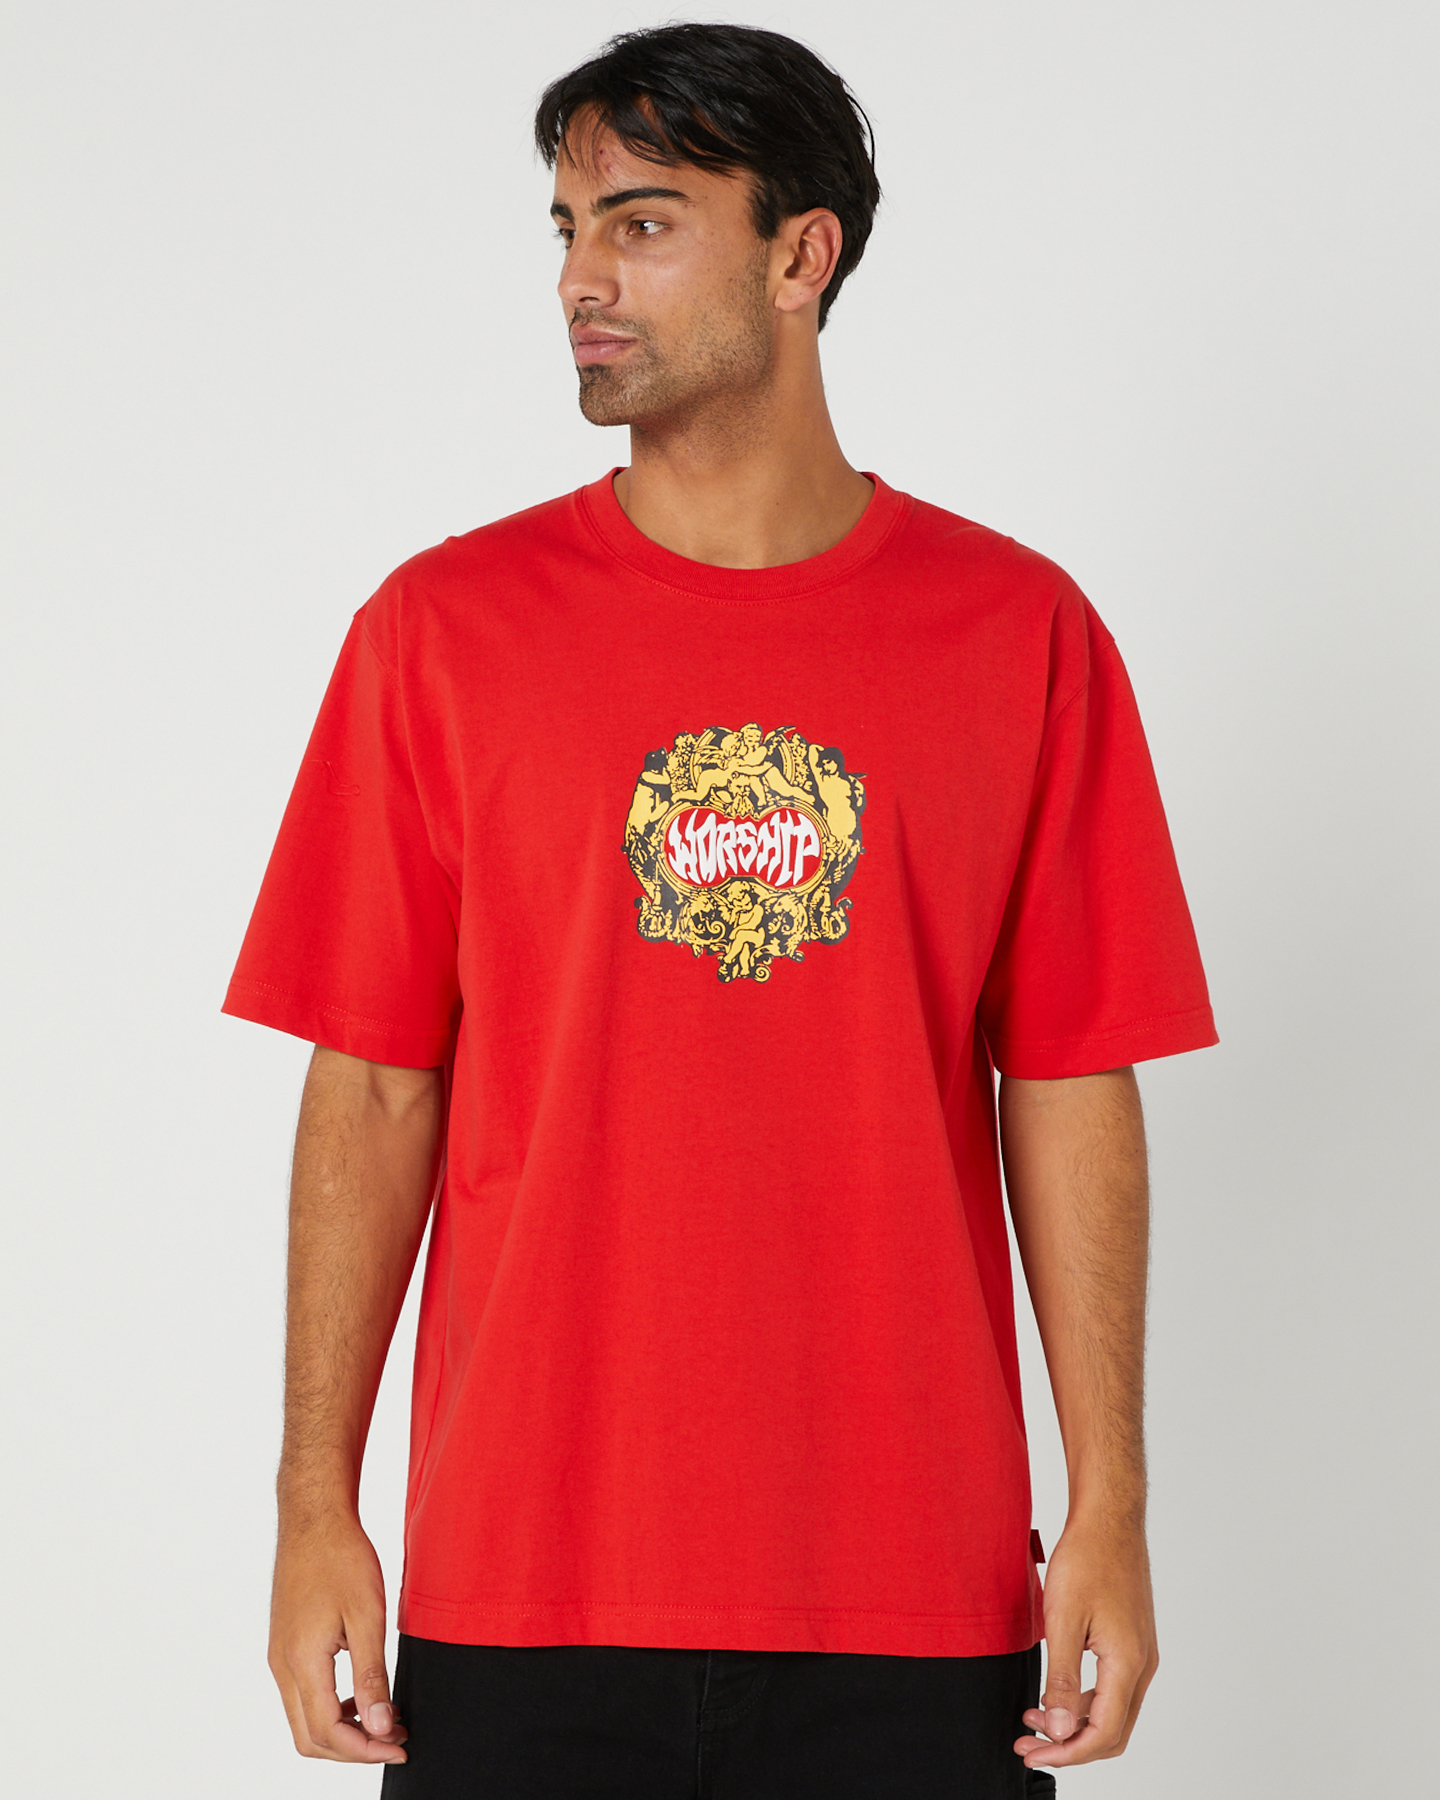 Worship Adorned Mens Ss Tee - Fiery Red | SurfStitch